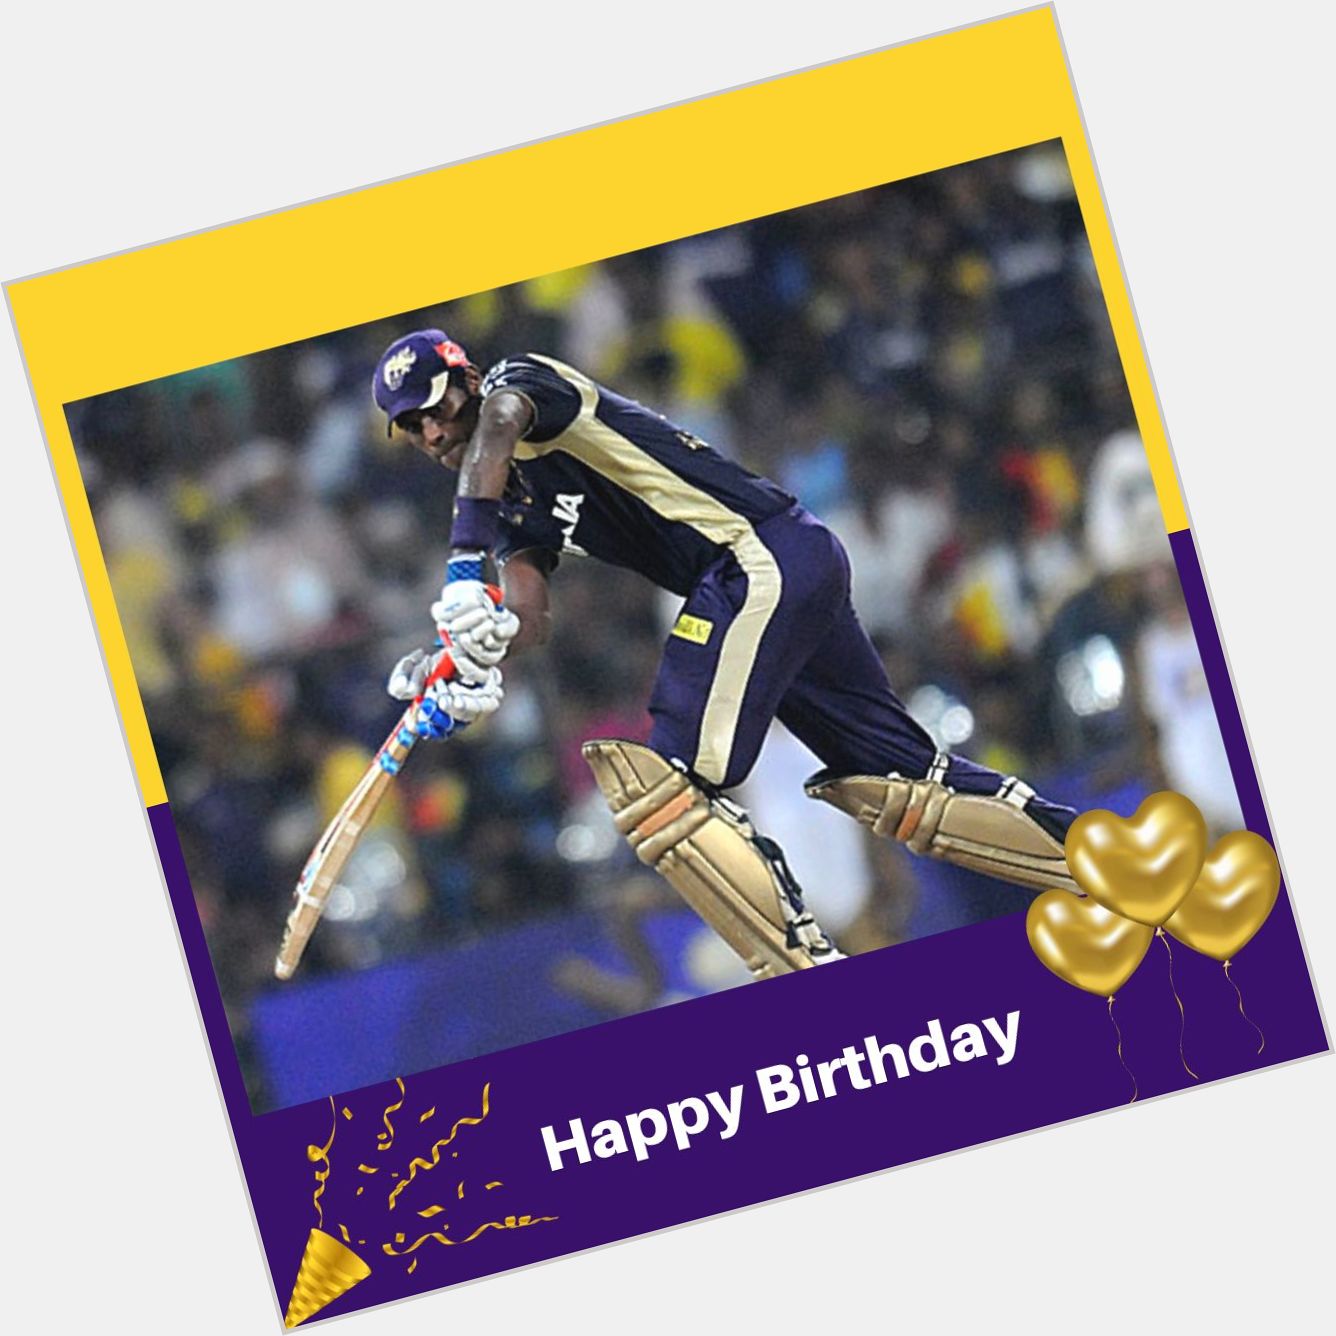 Wishing a very happy birthday to our former Knight, Angelo Mathews.  